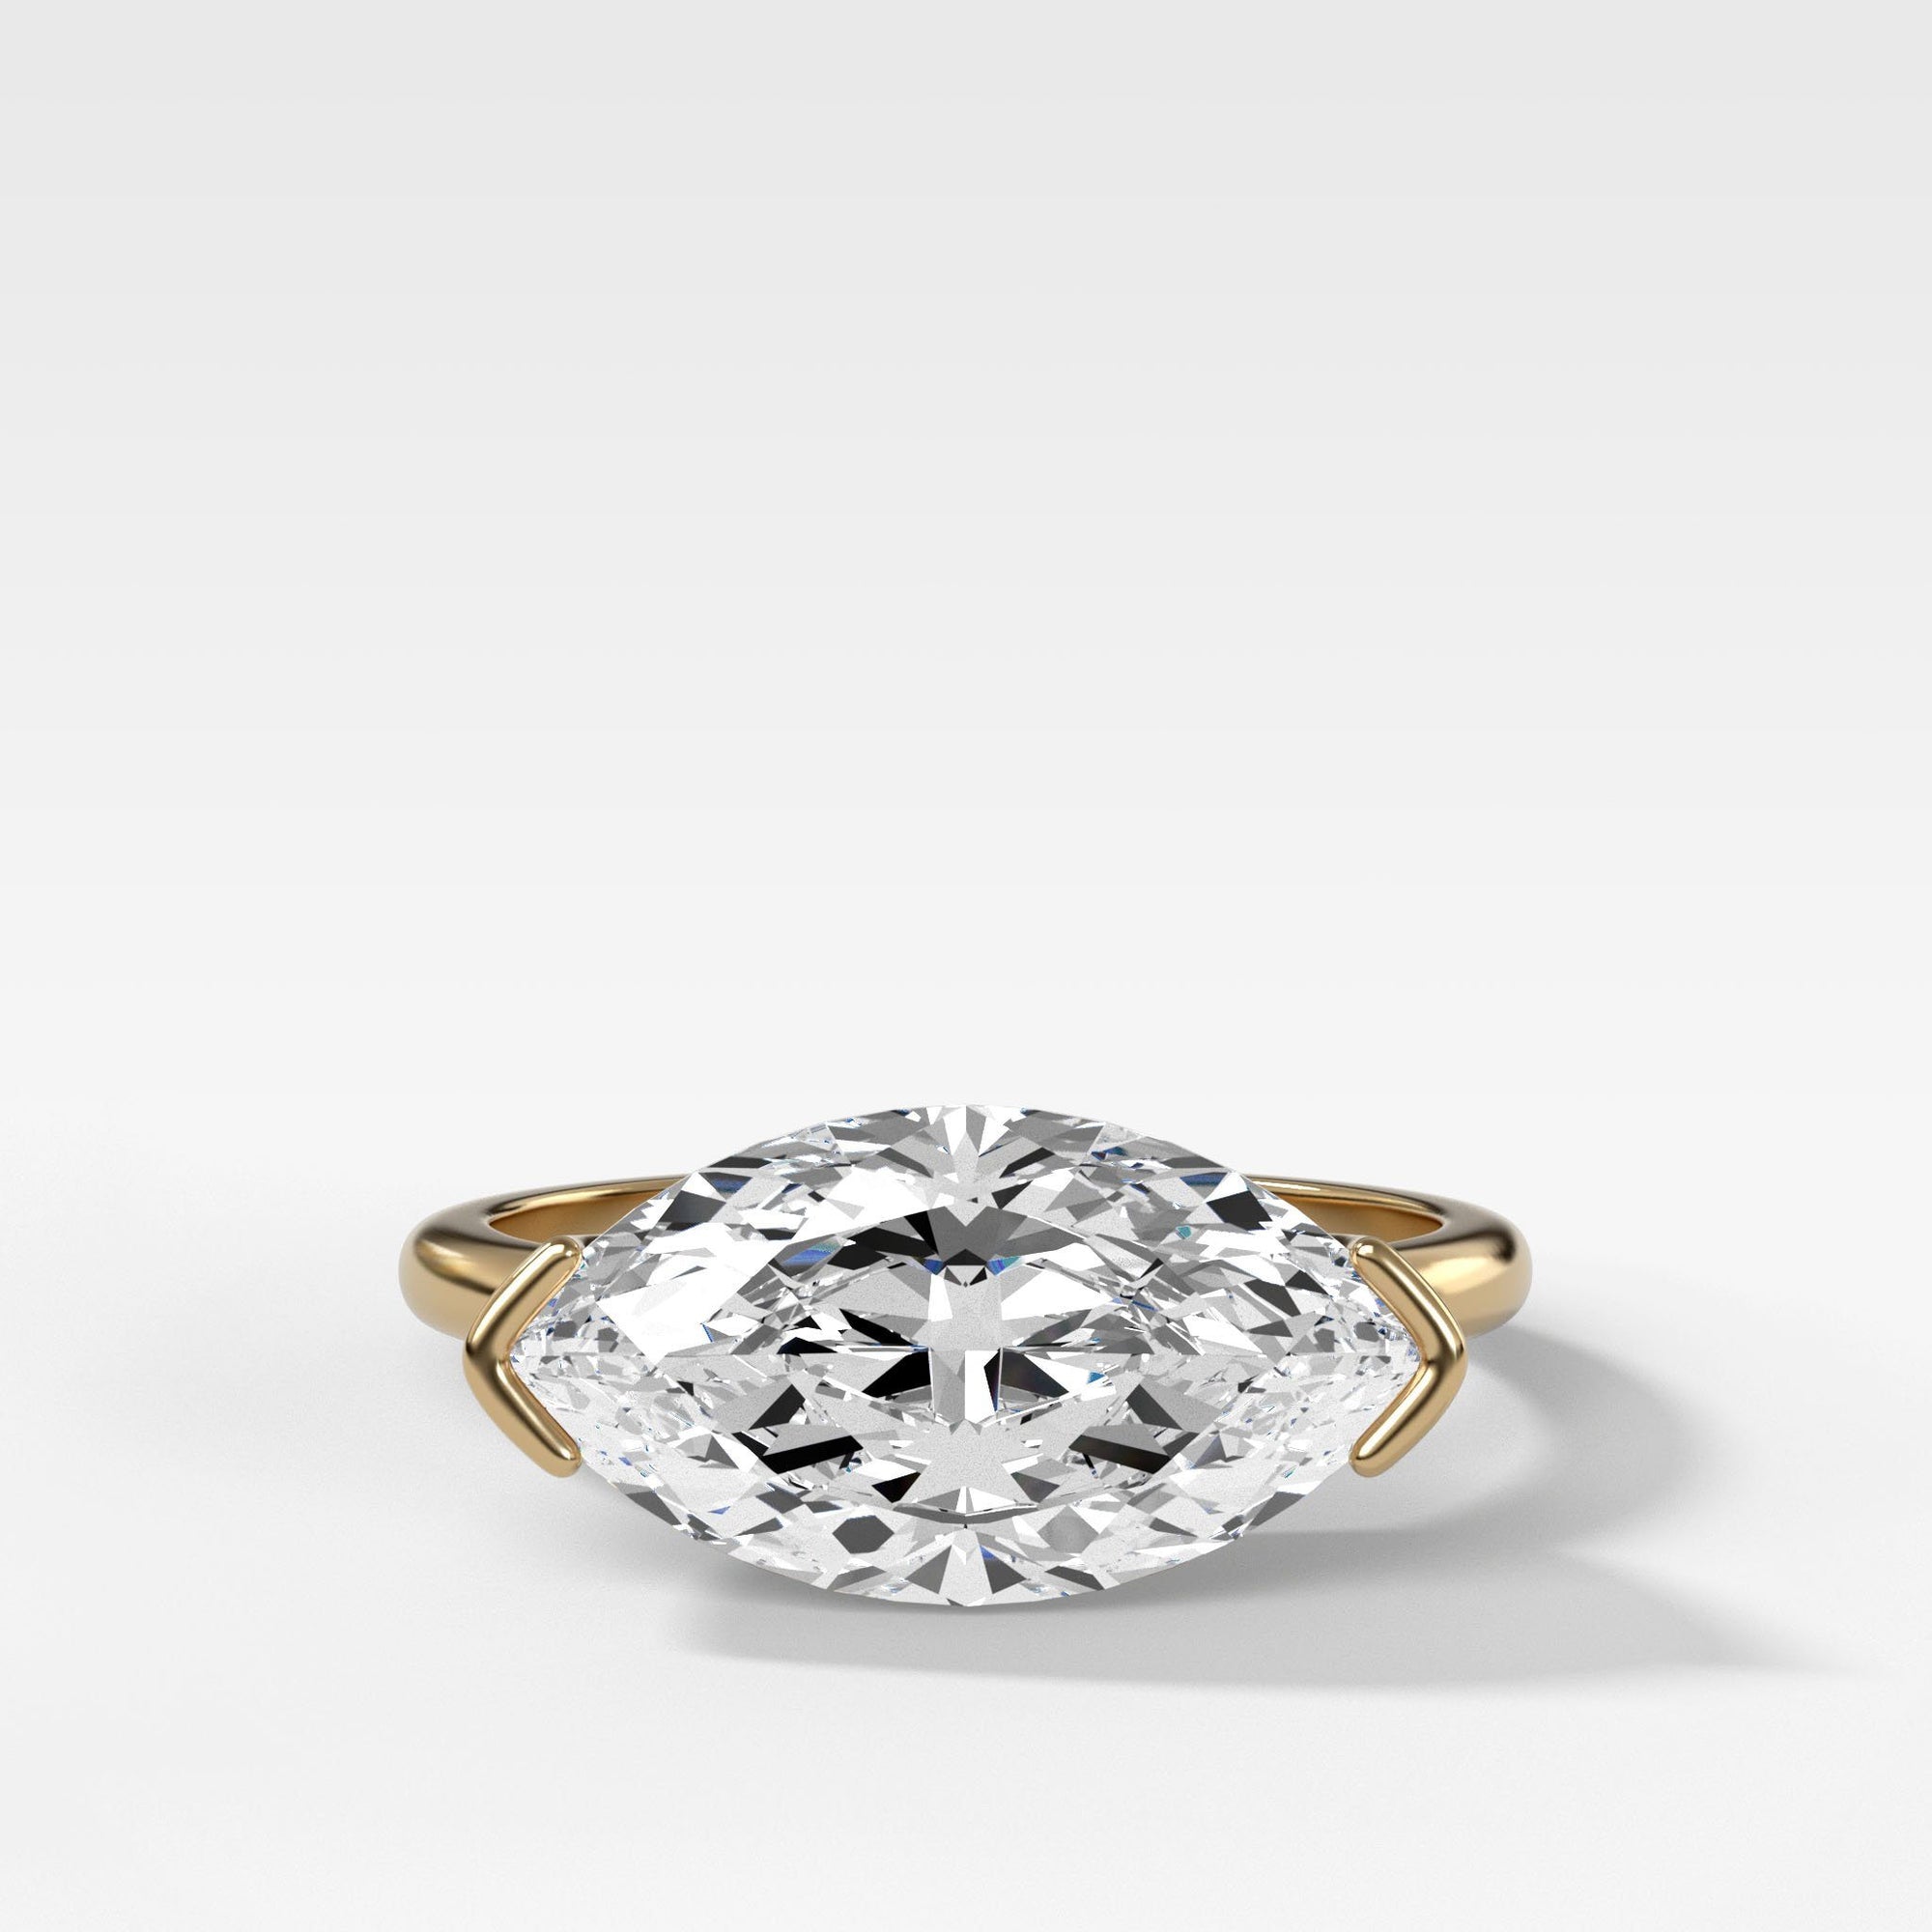 East West Half Bezel Solitaire Engagement Ring With Marquise Cut by Good Stone in Yellow Gold